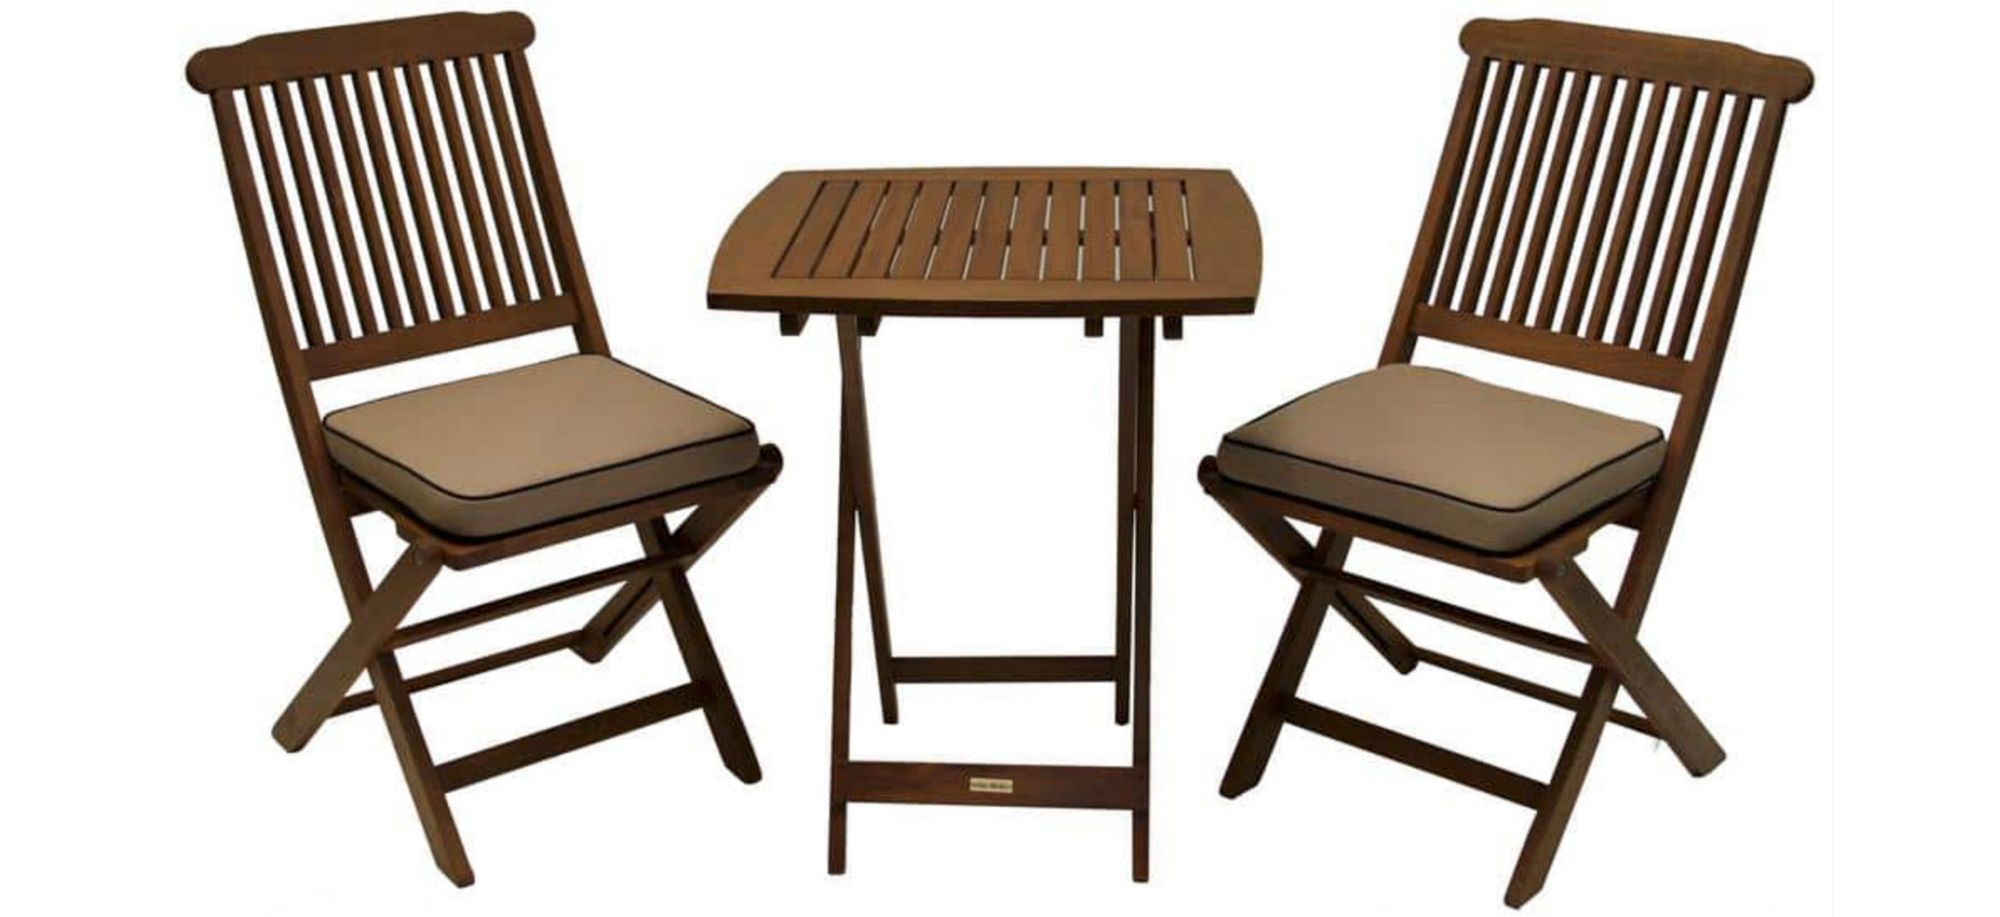 Ladybug 3-pc. Outdoor Bistro Set in Brown and beige by Outdoor Interiors